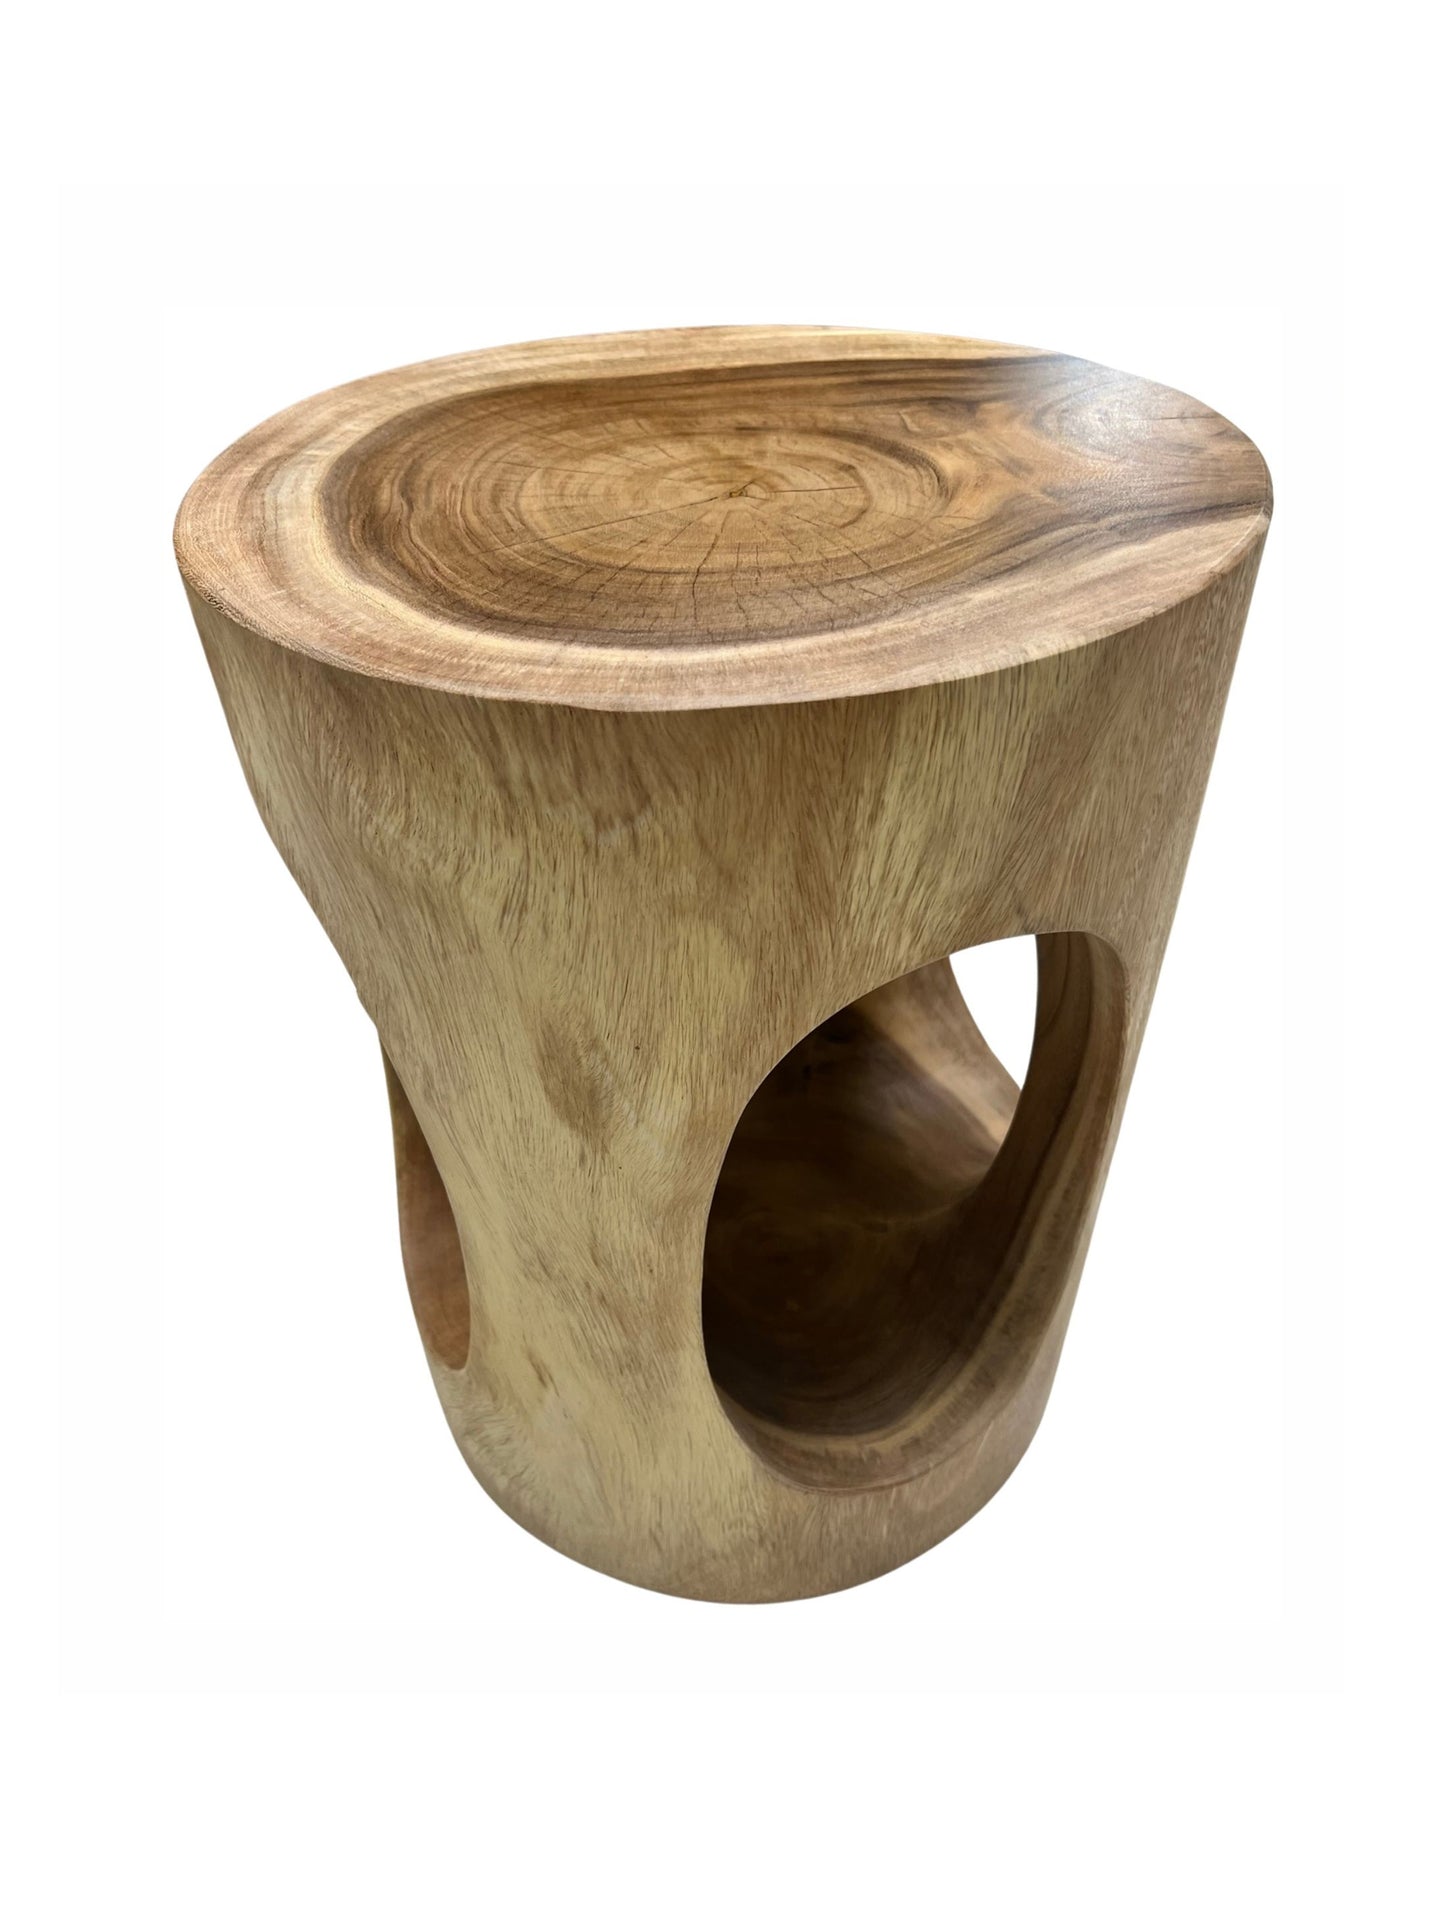 Eclectic Home Stool Meh Oval Hollow Stool 2928 Natural  Decor